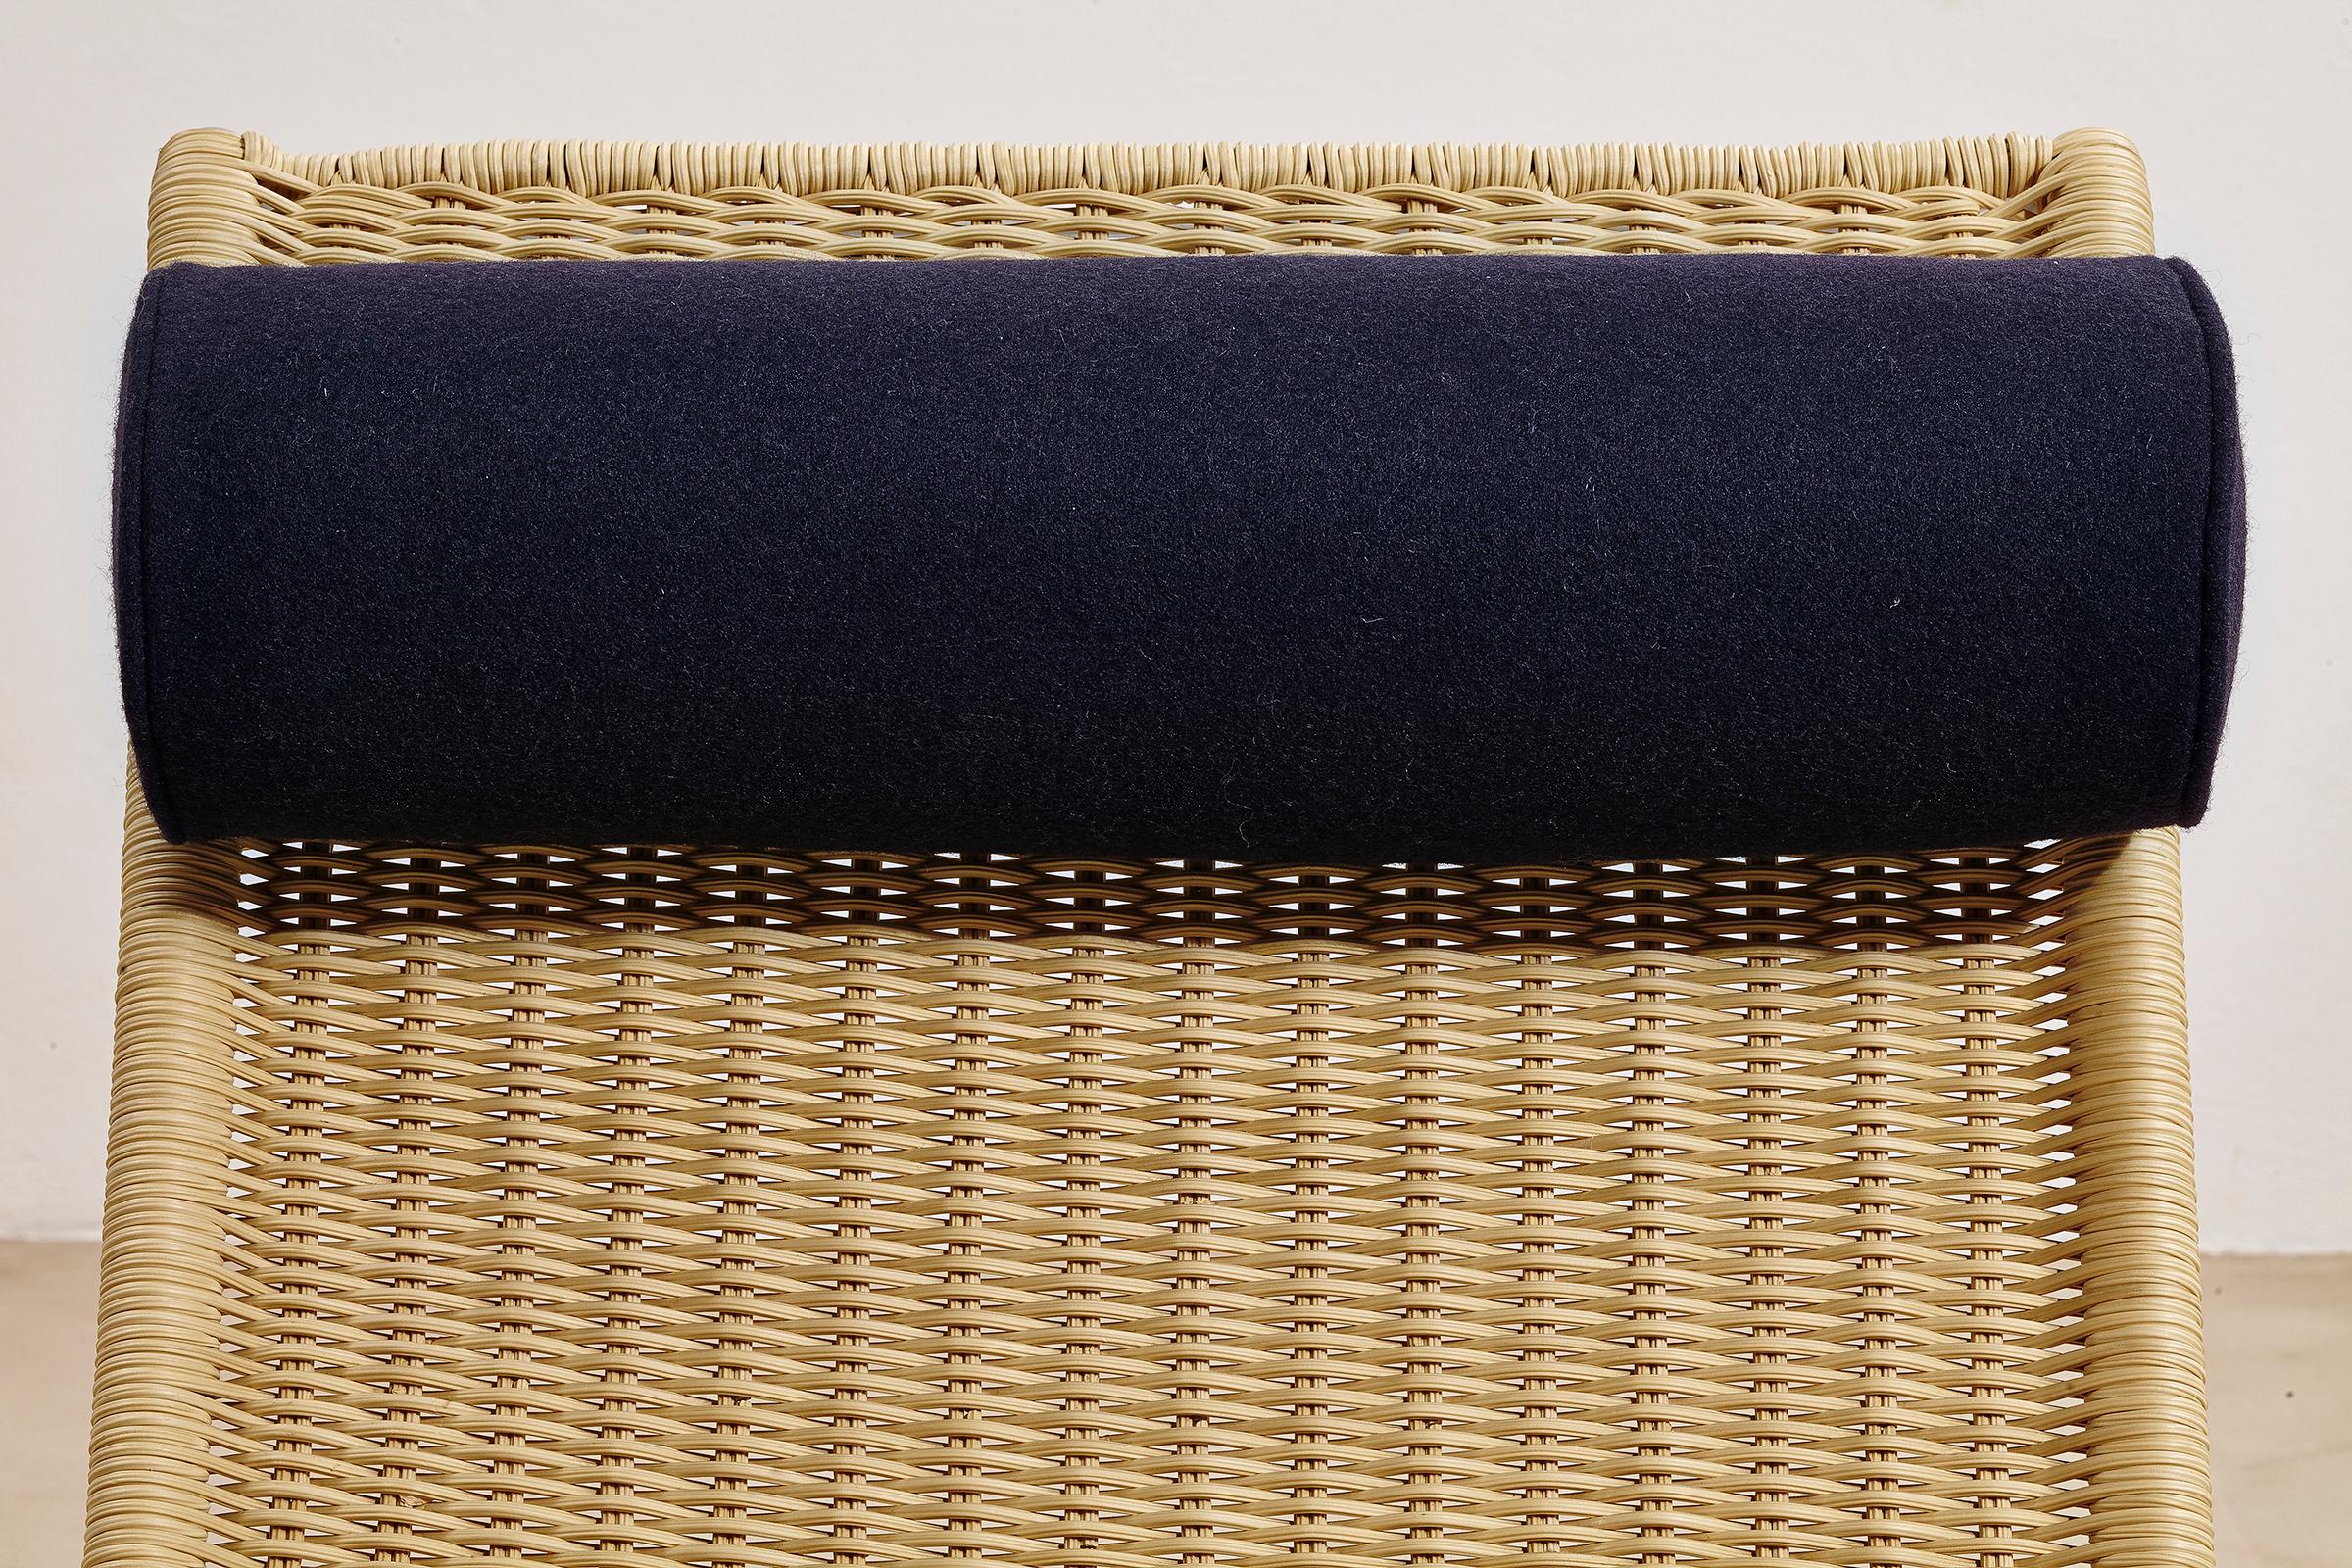 Mid-20th Century Wicker Chaise Longue ‘F42-1E’ by Mies Van Der Rohe, Designed in the Early 1930s